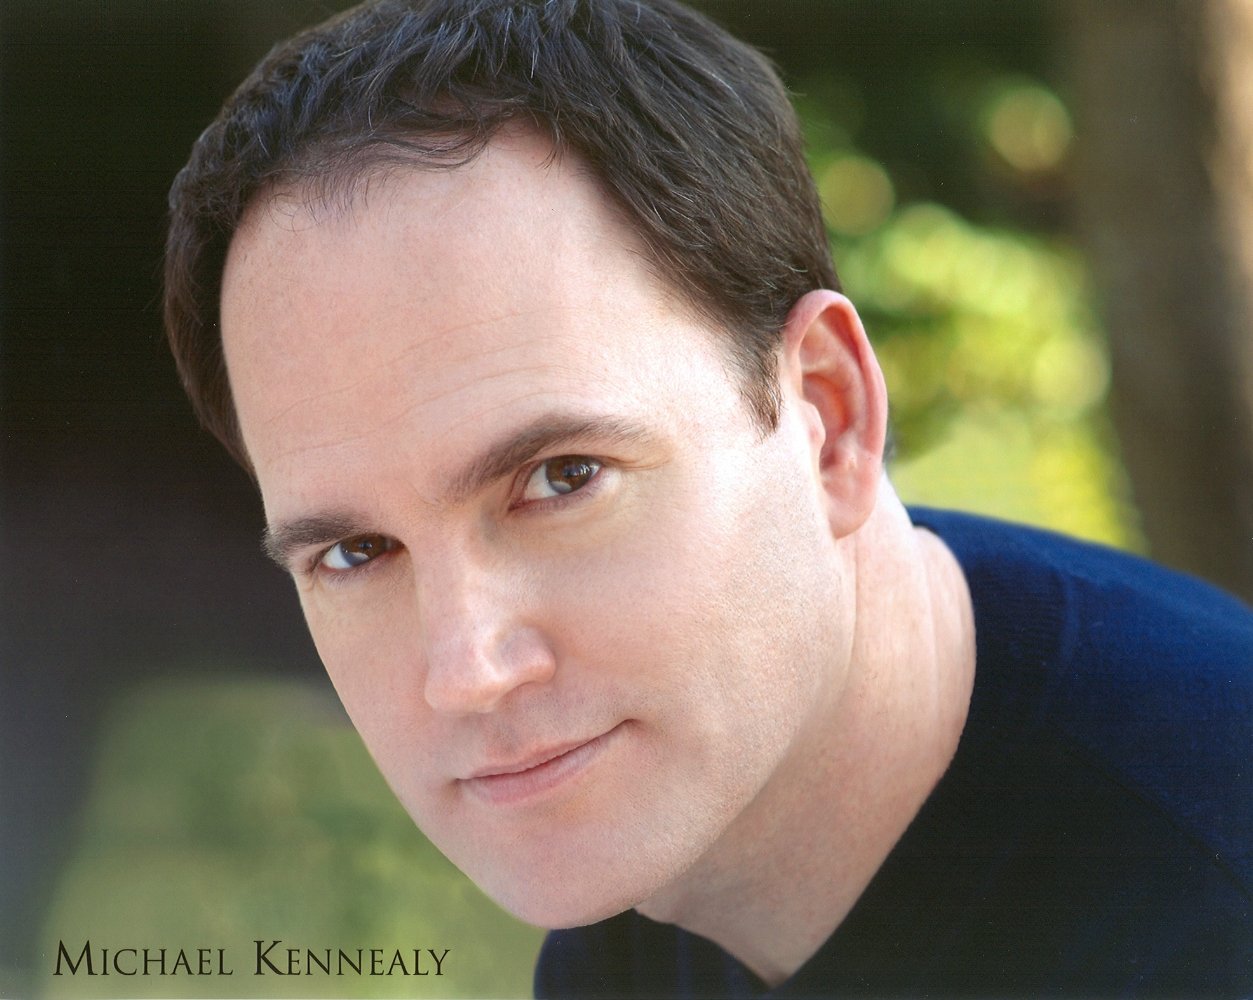 Michael Kennealy